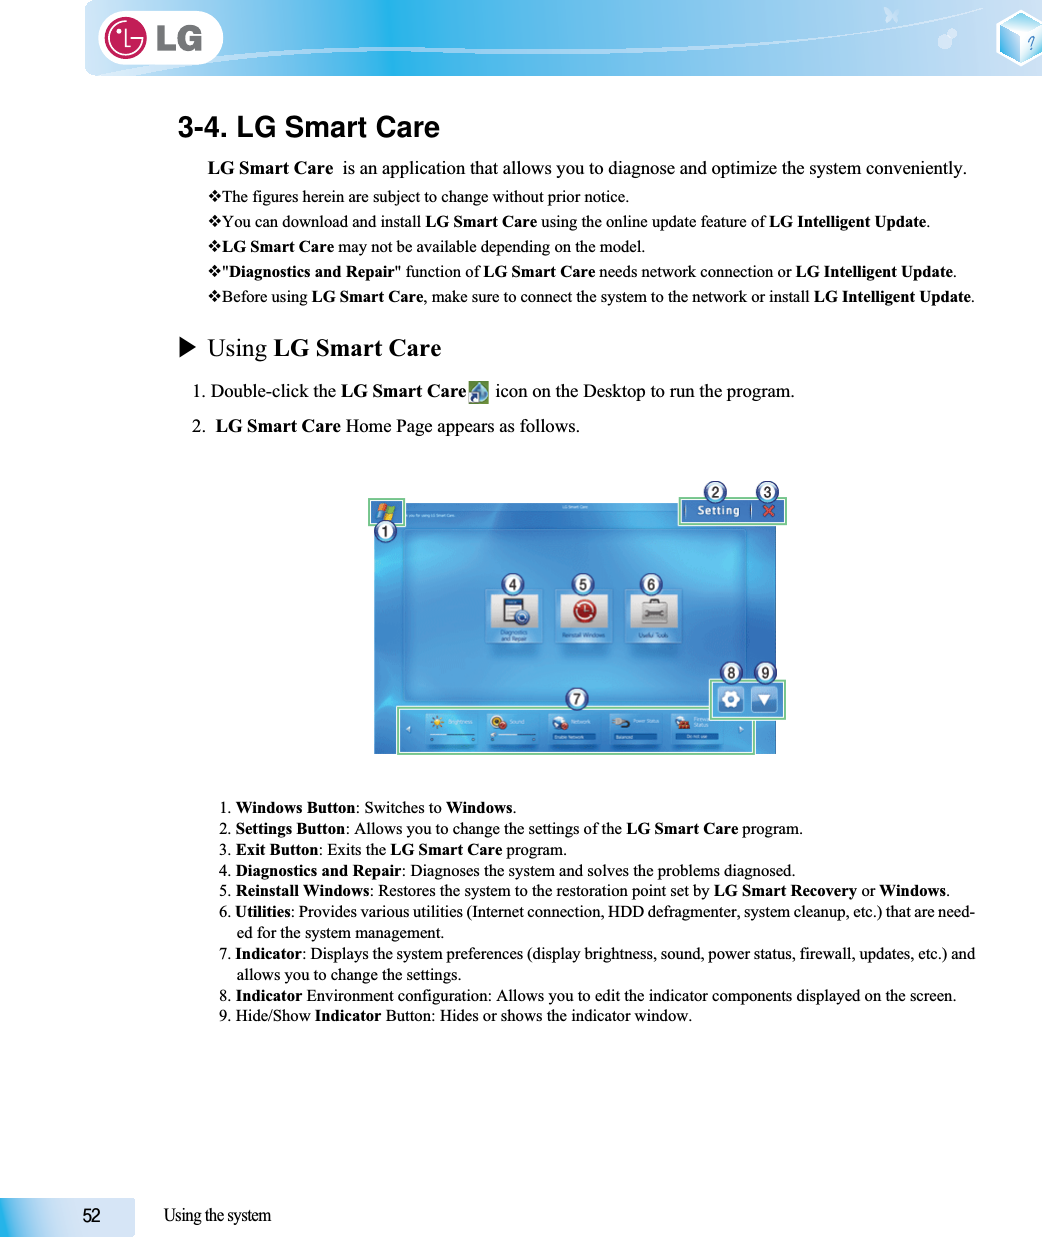 Using the system3-4. LG Smart CareLG Smart Care  is an application that allows you to diagnose and optimize the system conveniently.The figures herein are subject to change without prior notice.You can download and install LG Smart Care using the online update feature of LG Intelligent Update.LG Smart Care may not be available depending on the model.&quot;Diagnostics and Repair&quot; function of LG Smart Care needs network connection or LG Intelligent Update.Before using LG Smart Care, make sure to connect the system to the network or install LG Intelligent Update.XUsing LG Smart Care1. Double-click the LG Smart Care  icon on the Desktop to run the program.2.  LG Smart Care Home Page appears as follows.1. Windows Button: Switches to Windows.2. Settings Button: Allows you to change the settings of the LG Smart Care program.3. Exit Button: Exits the LG Smart Care program.4. Diagnostics and Repair: Diagnoses the system and solves the problems diagnosed.5. Reinstall Windows: Restores the system to the restoration point set by LG Smart Recovery or Windows.6. Utilities: Provides various utilities (Internet connection, HDD defragmenter, system cleanup, etc.) that are need-ed for the system management.7. Indicator: Displays the system preferences (display brightness, sound, power status, firewall, updates, etc.) andallows you to change the settings.8. Indicator Environment configuration: Allows you to edit the indicator components displayed on the screen.9. Hide/Show Indicator Button: Hides or shows the indicator window.